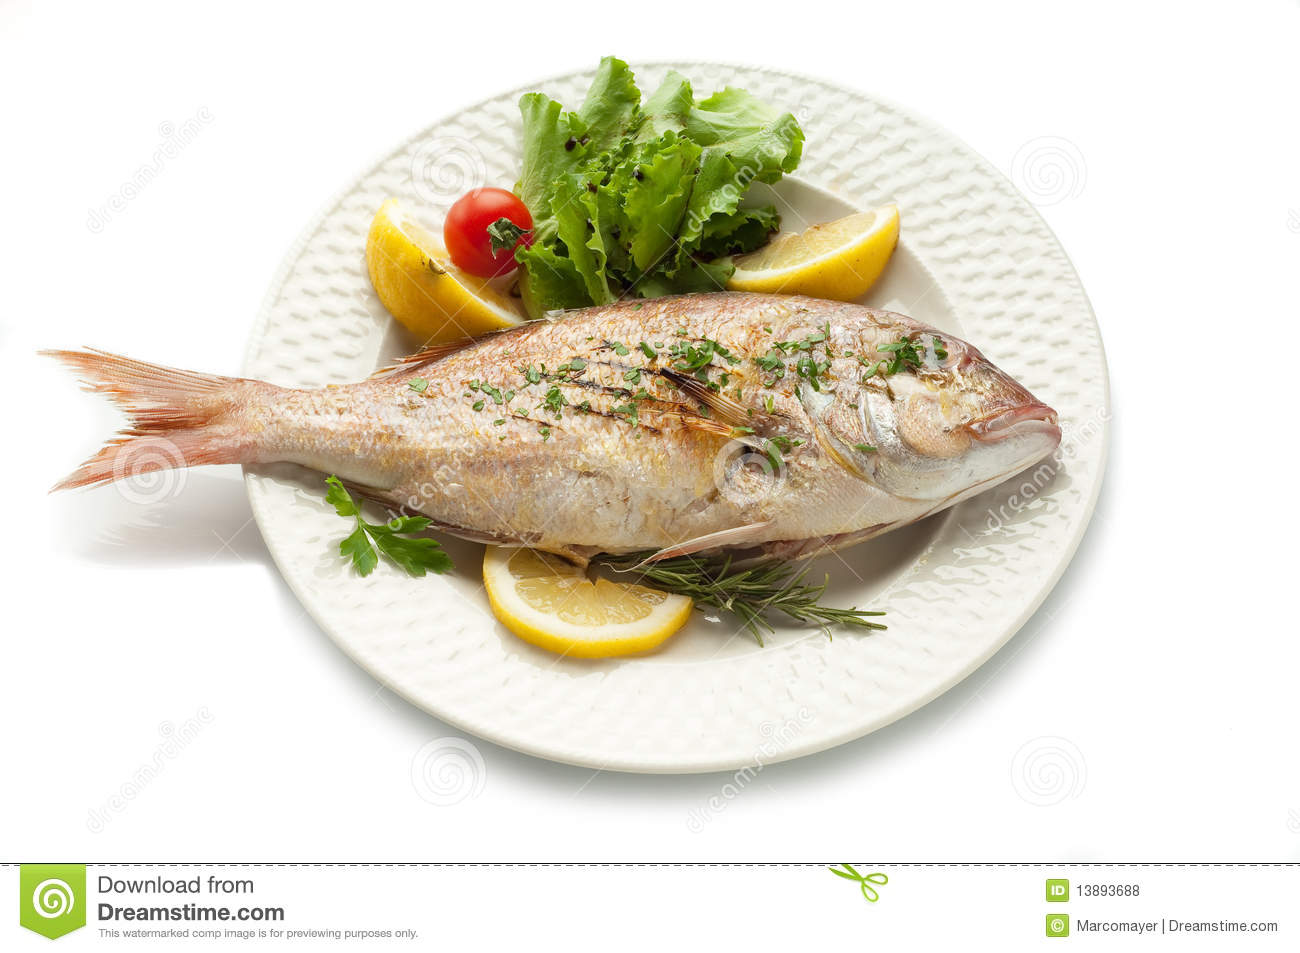 Grilled Red Snapper With Salad Royalty Free Stock Photos   Image